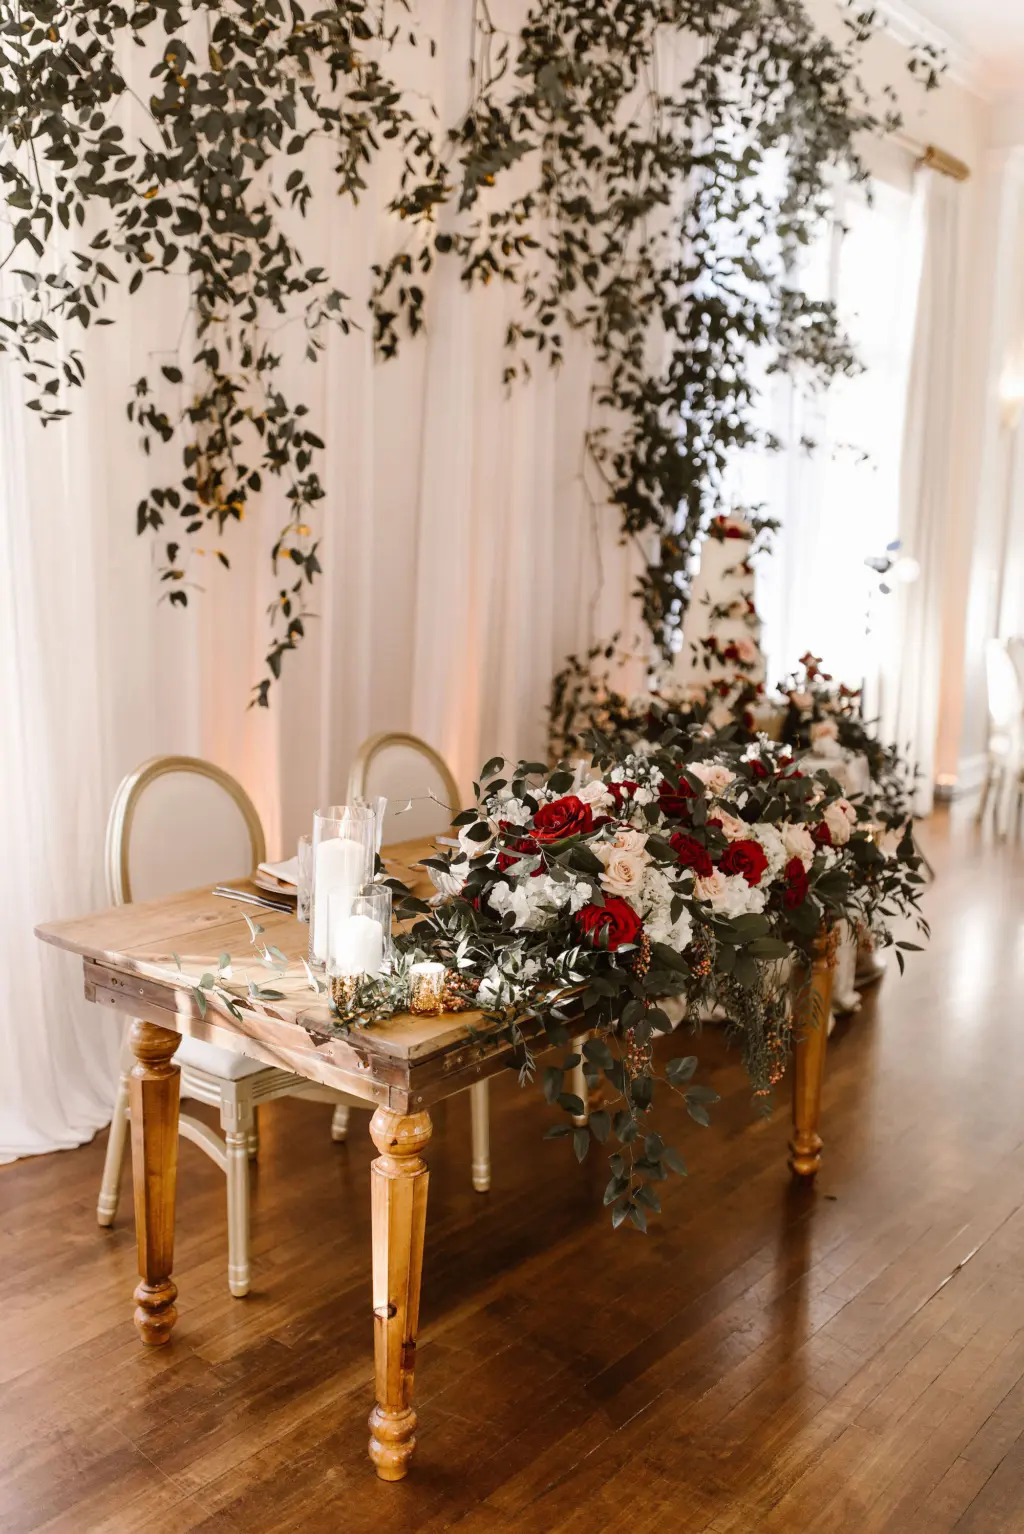 Cascading Greenery for Sweetheart Table at Wedding Reception with Extravagant Tabletop Burgundy and White Rose Flower Arrangement